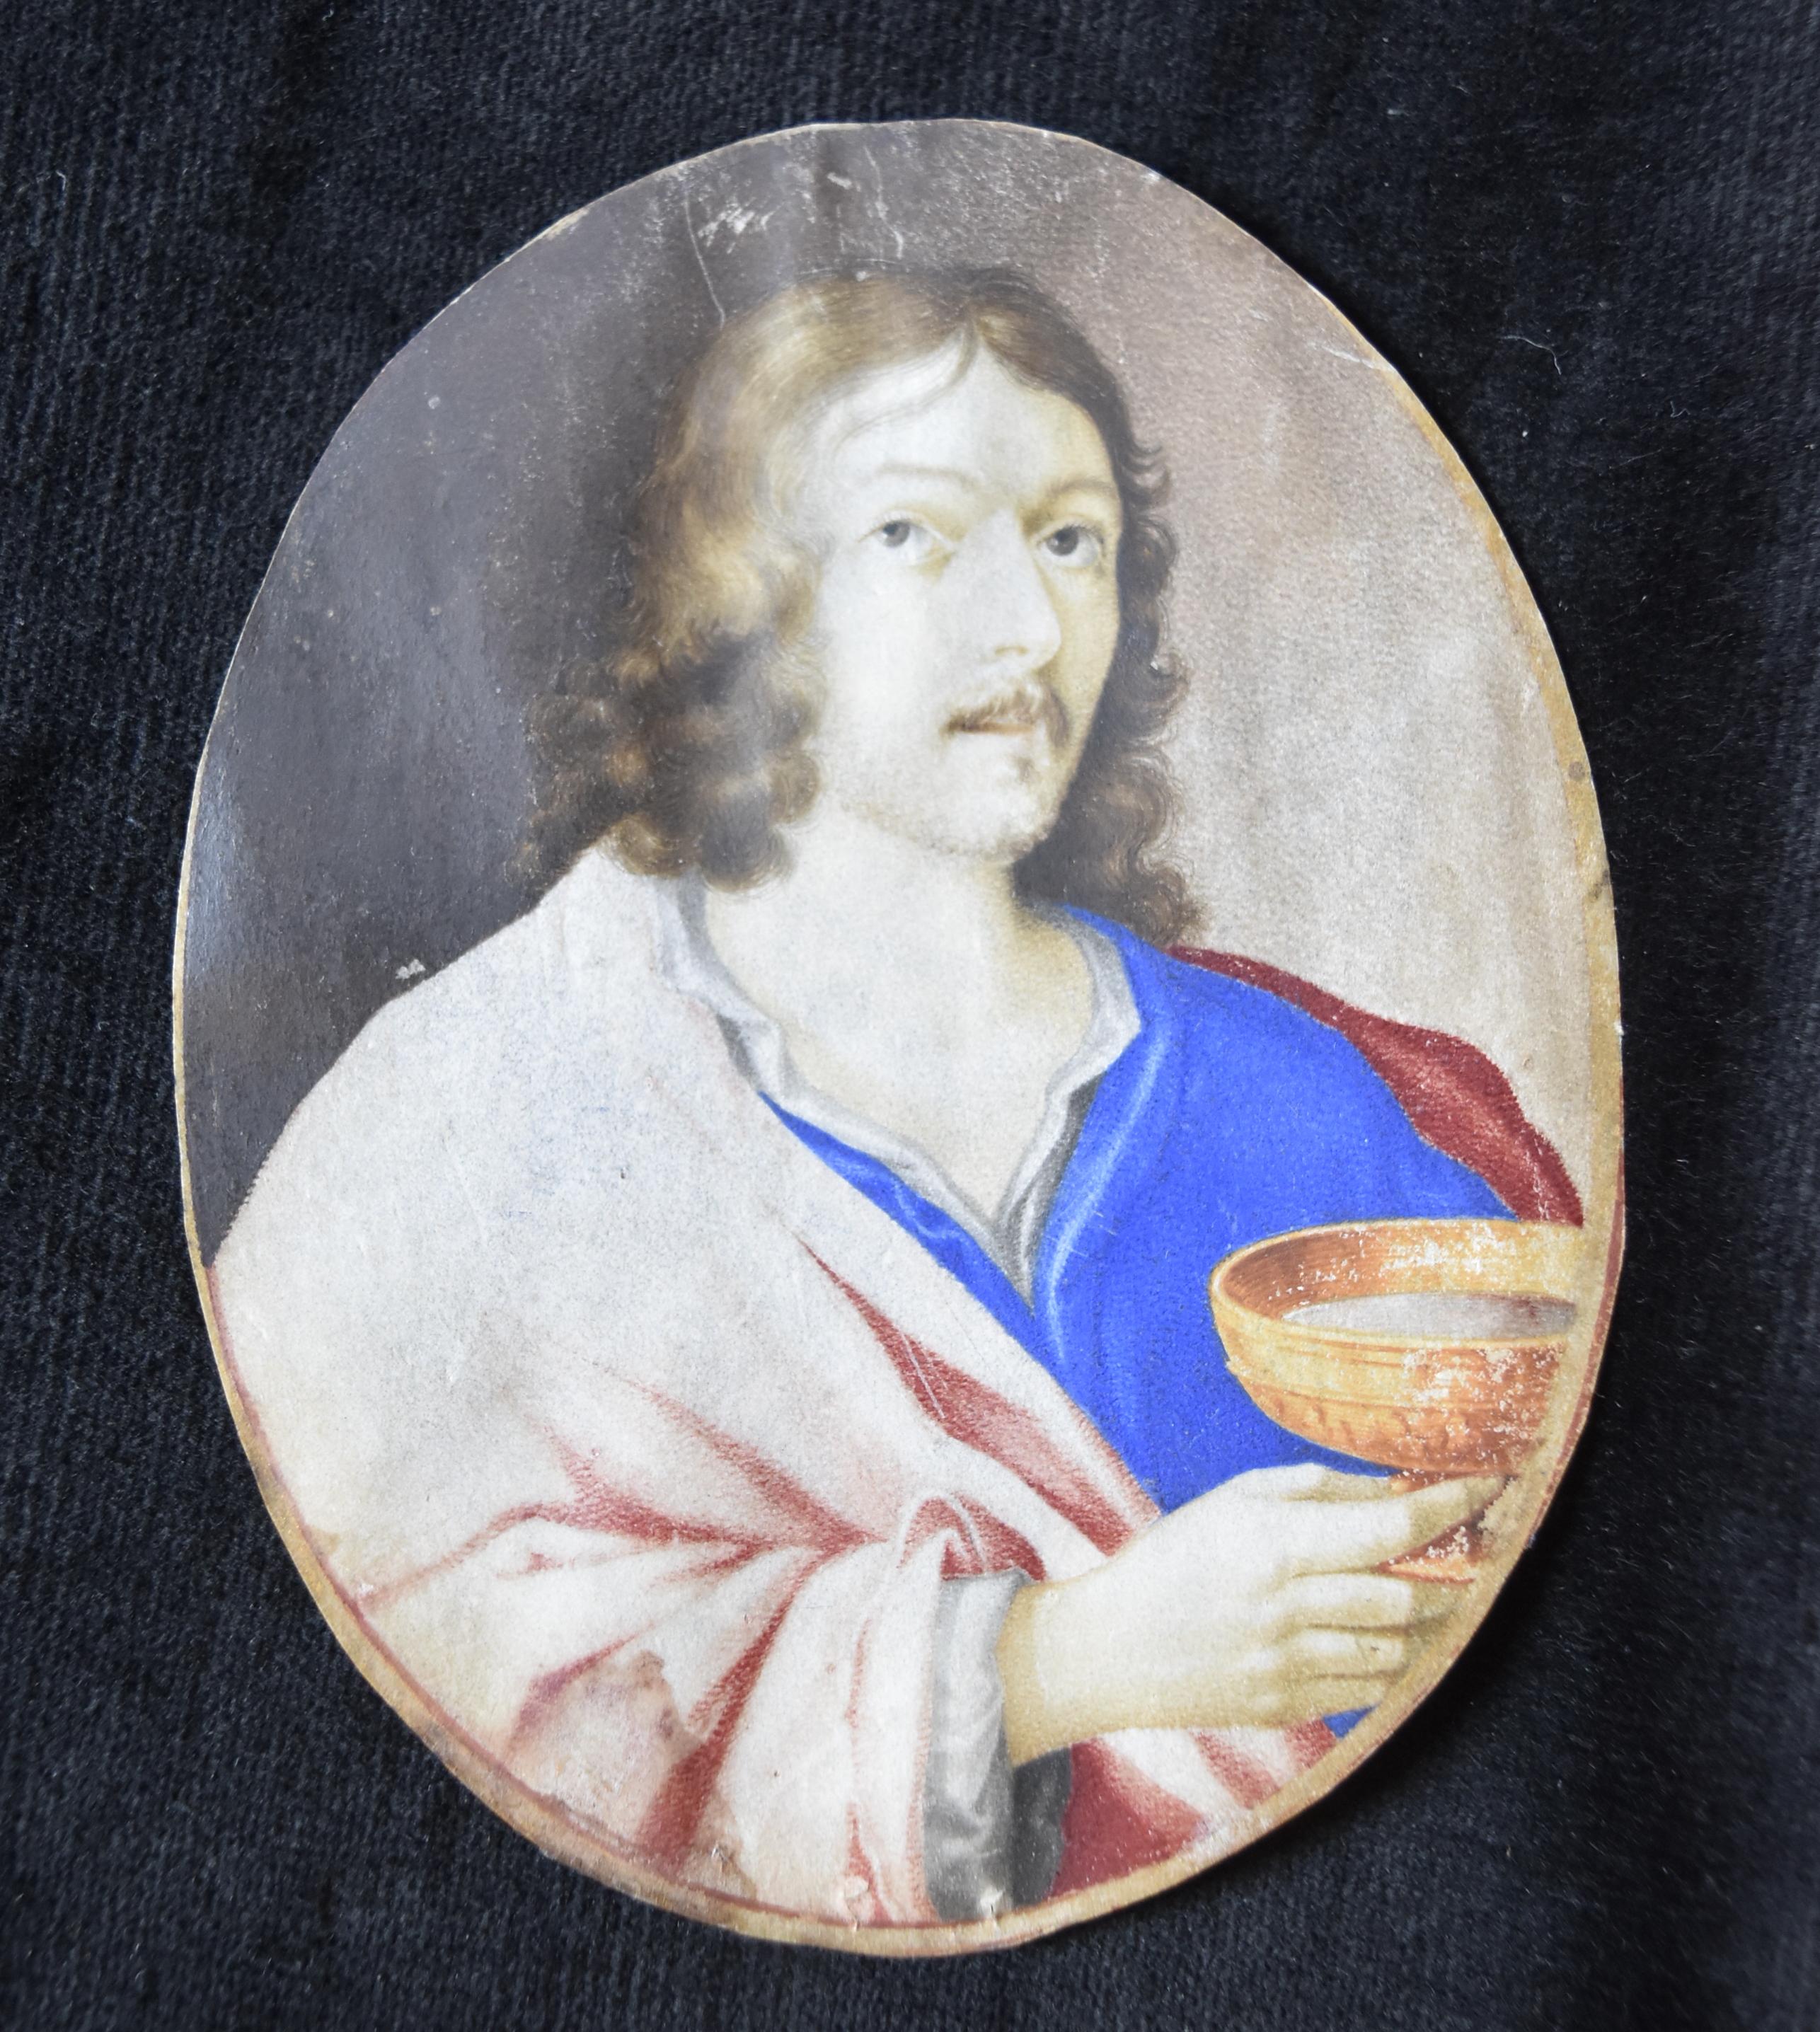 17th Century French School
The Christ holding a Chalice
Gouache on vellum
Oval shape, 10 x 8 cm
In a 19th century oak frame
In quite good condition, some slight abrasions, slightly discoloured.

This very fine depiction of the Christ - during last